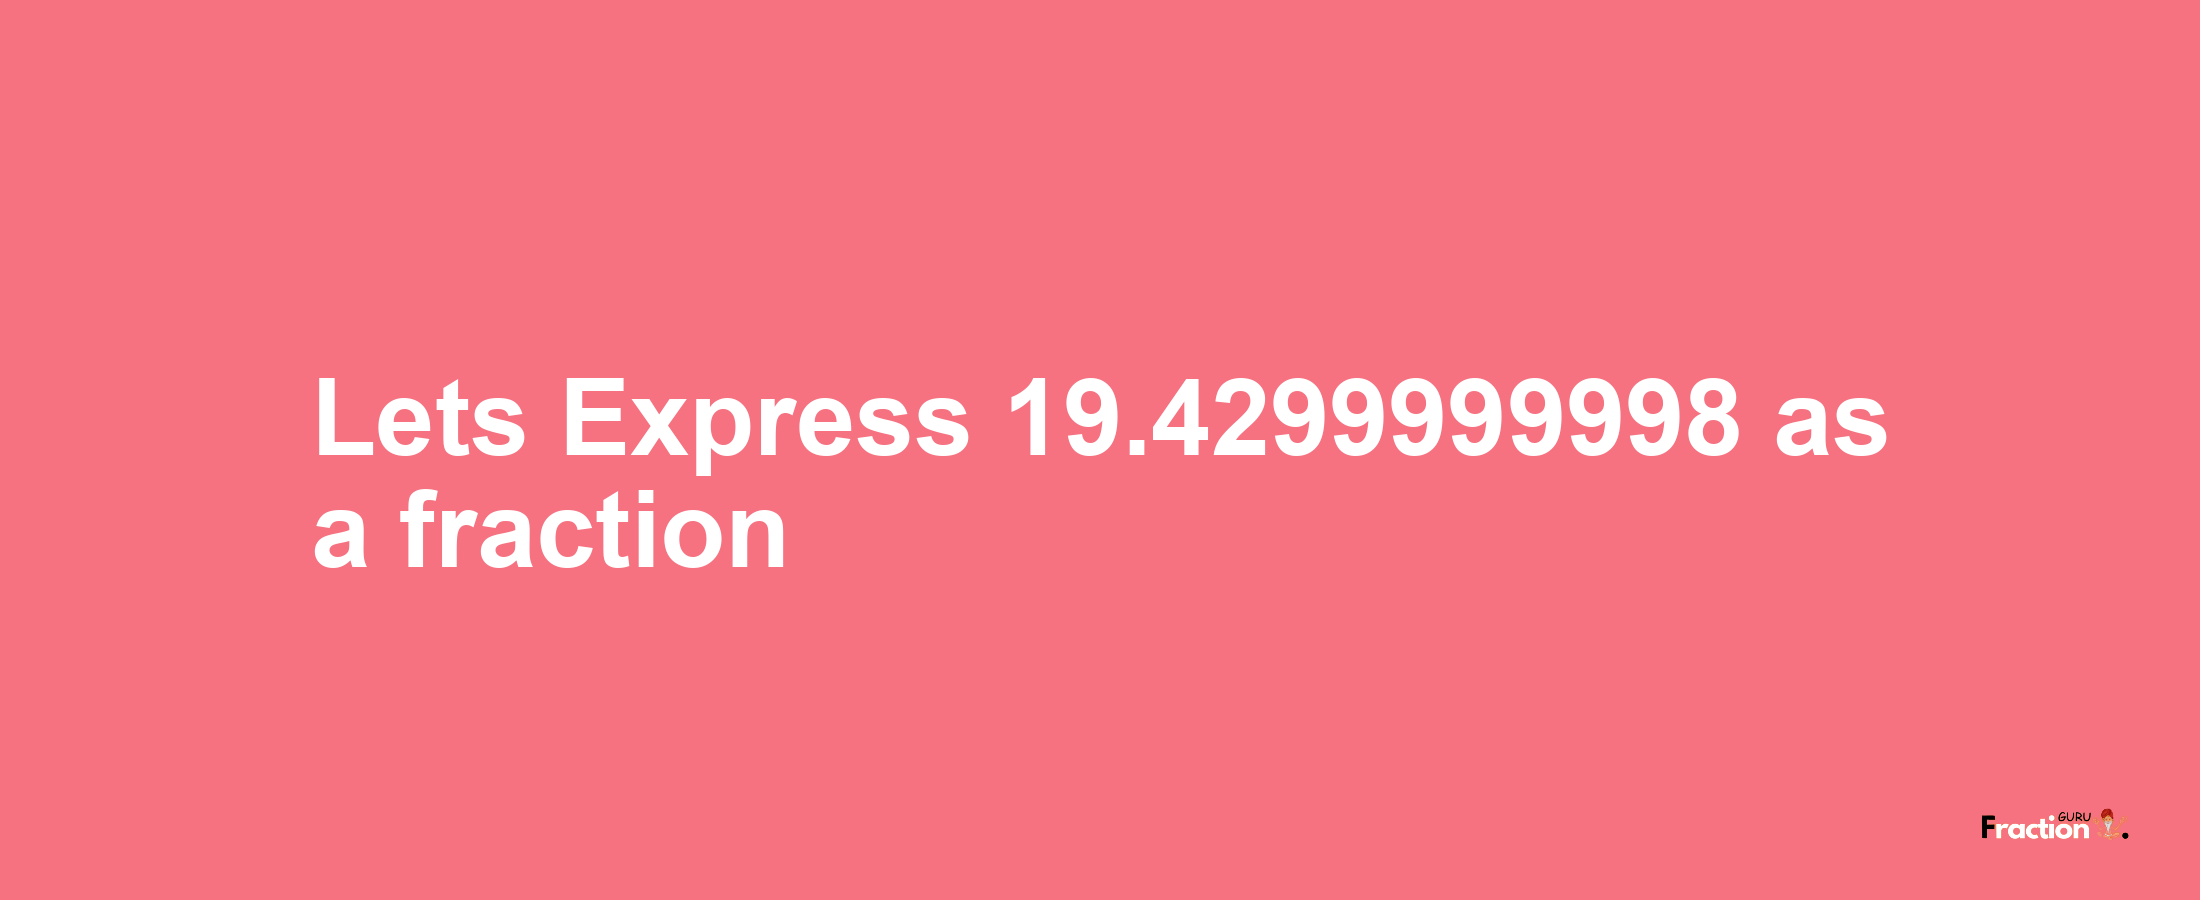 Lets Express 19.4299999998 as afraction